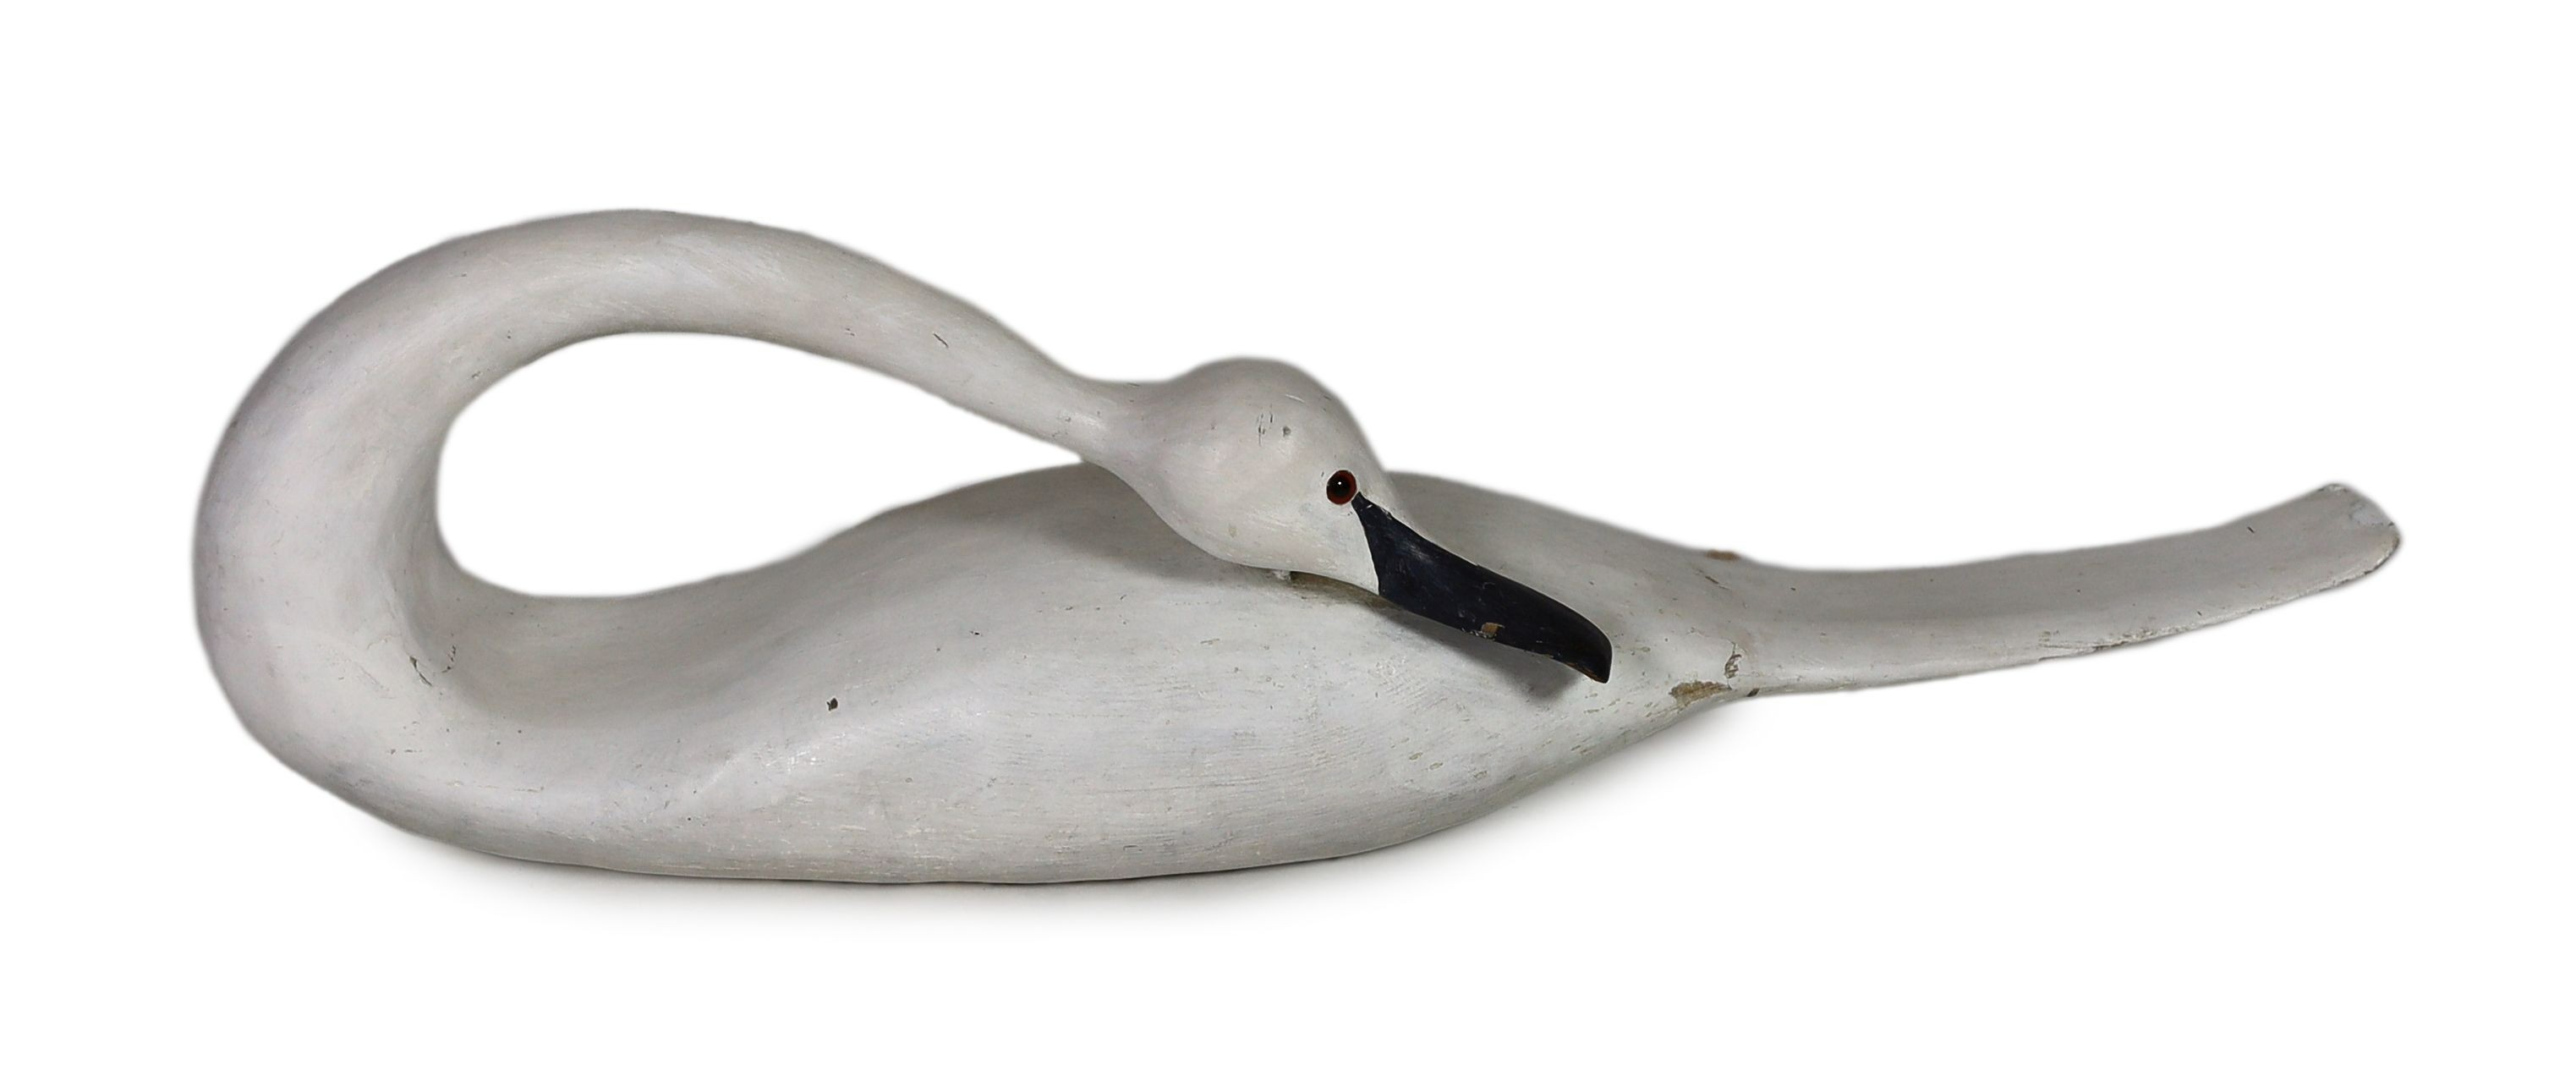 Guy Taplin (b.1939), Swan, carved and painted wood sculpture, length 113cm, depth 29cm, height 33cm